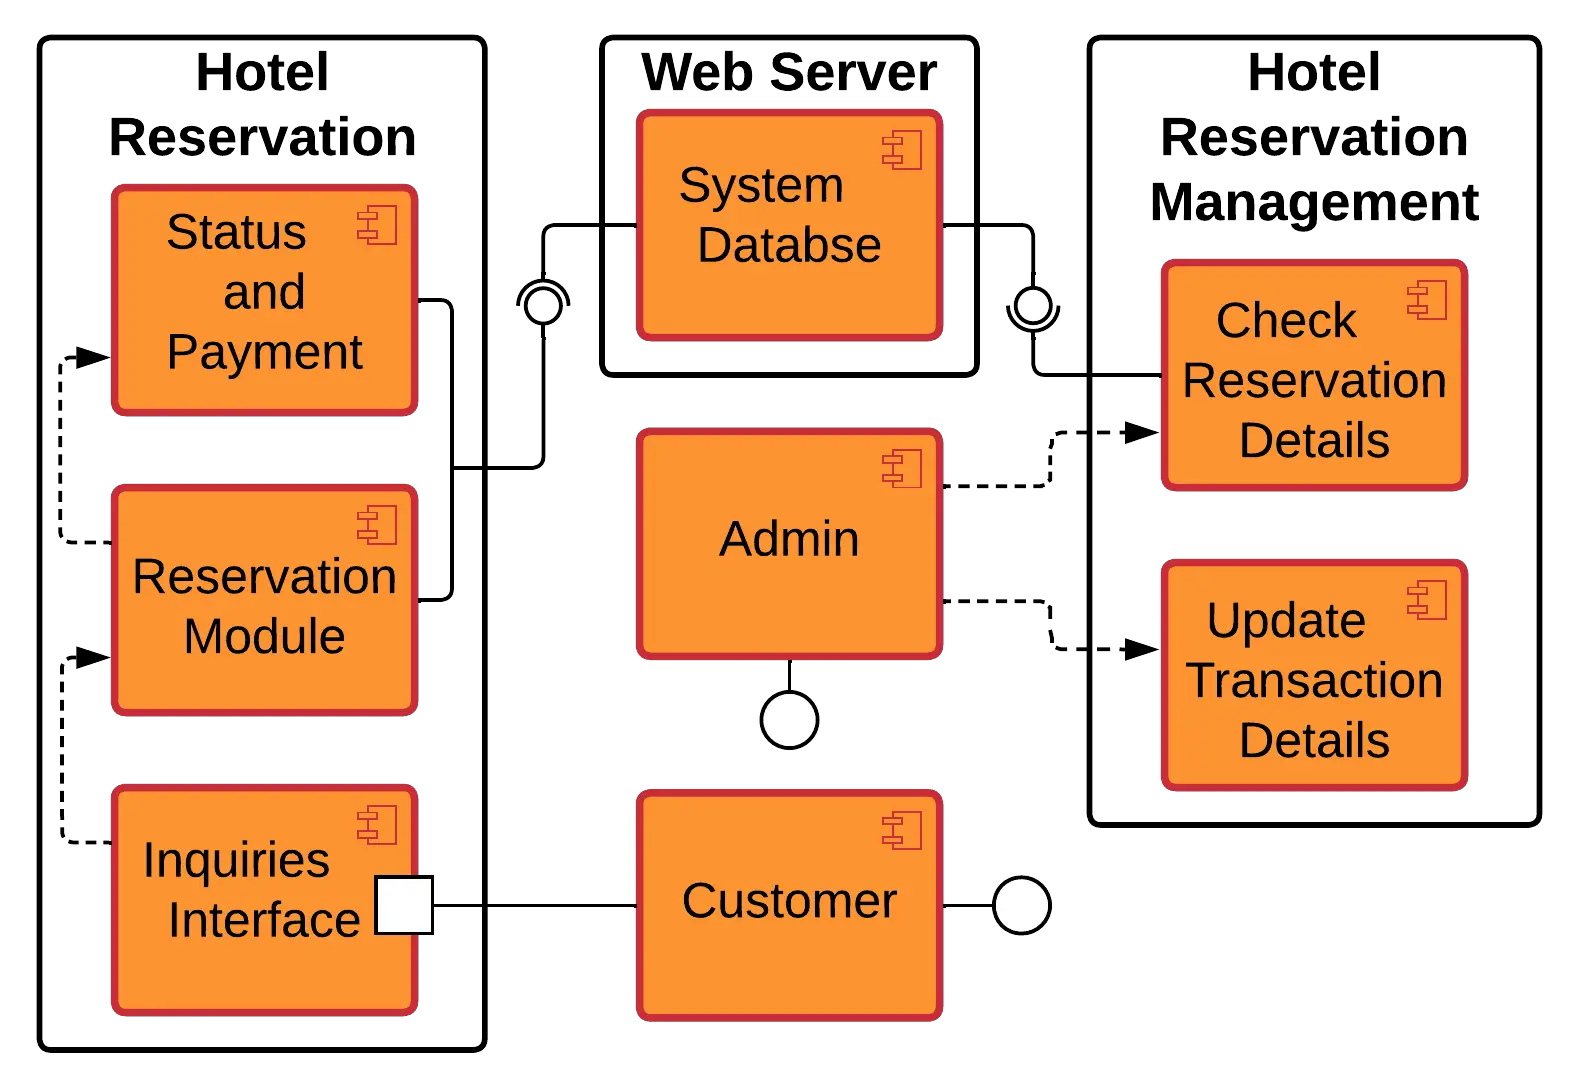 Uml Activity Diagram For Hotel Reservation System System Architecture ...